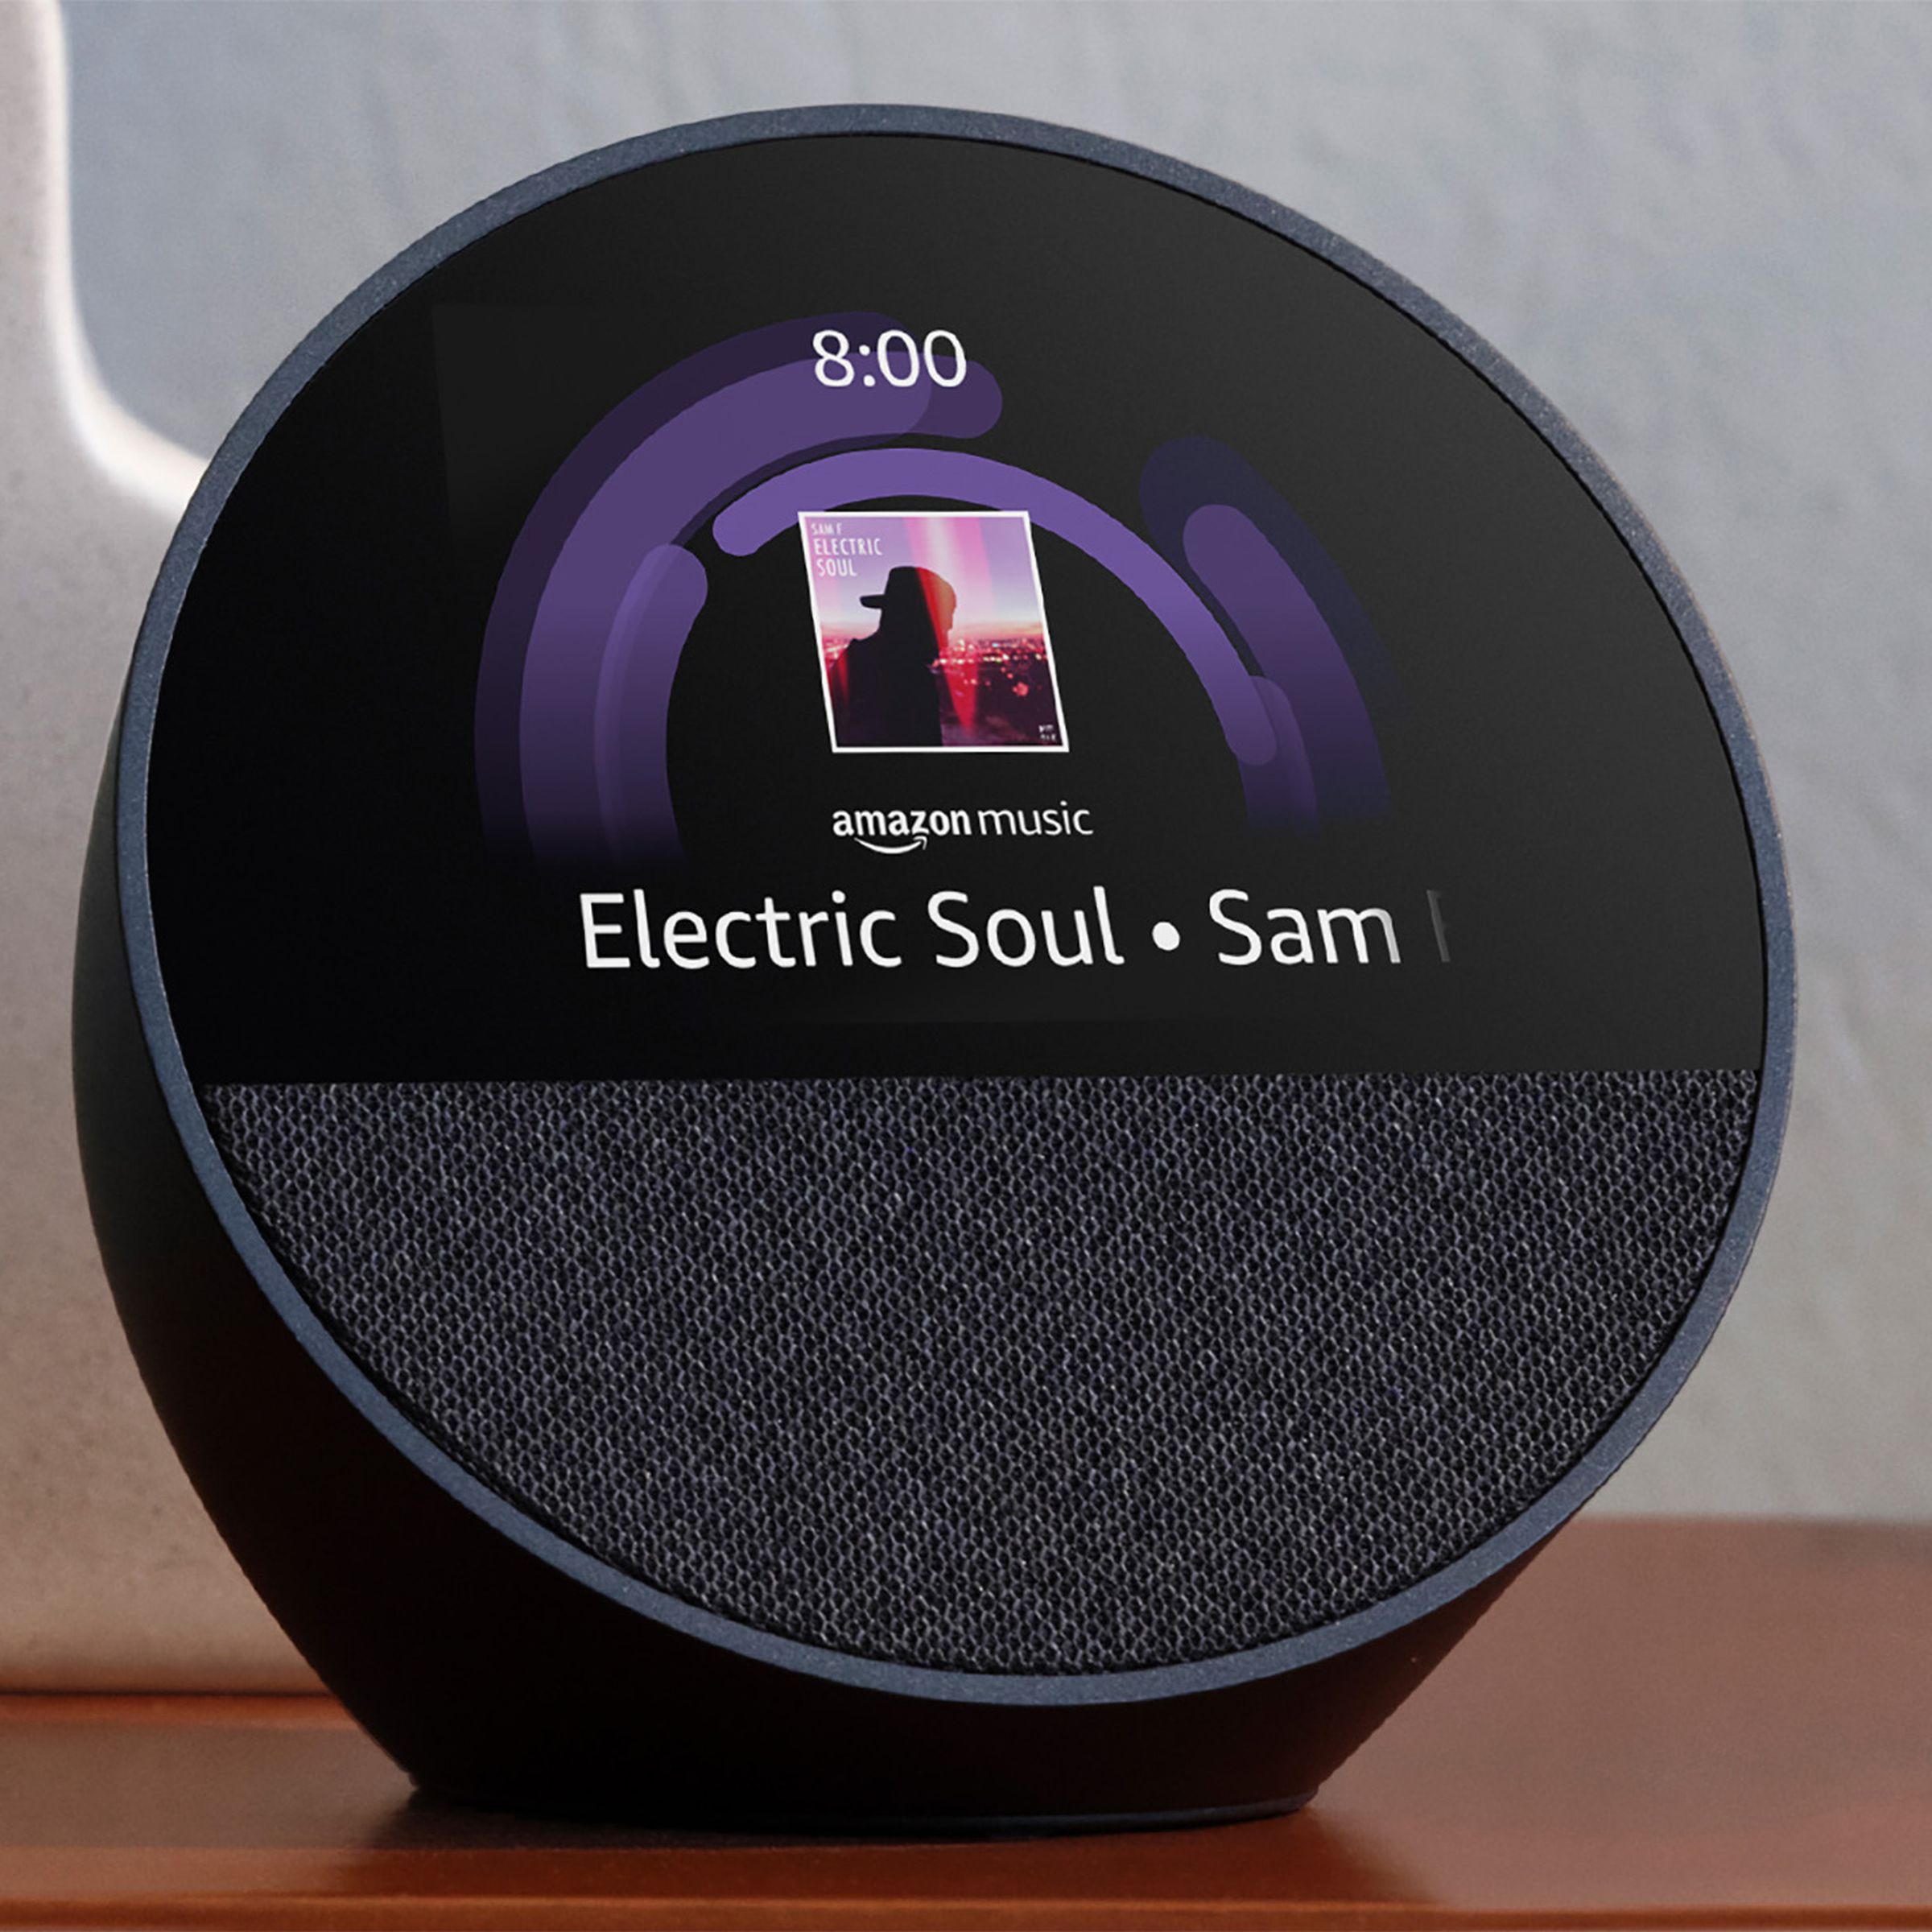 Amazon Echo Spot smat speaker sitting on a table with cover art and title of a song “Electric Soul” playing via Amazon Music.